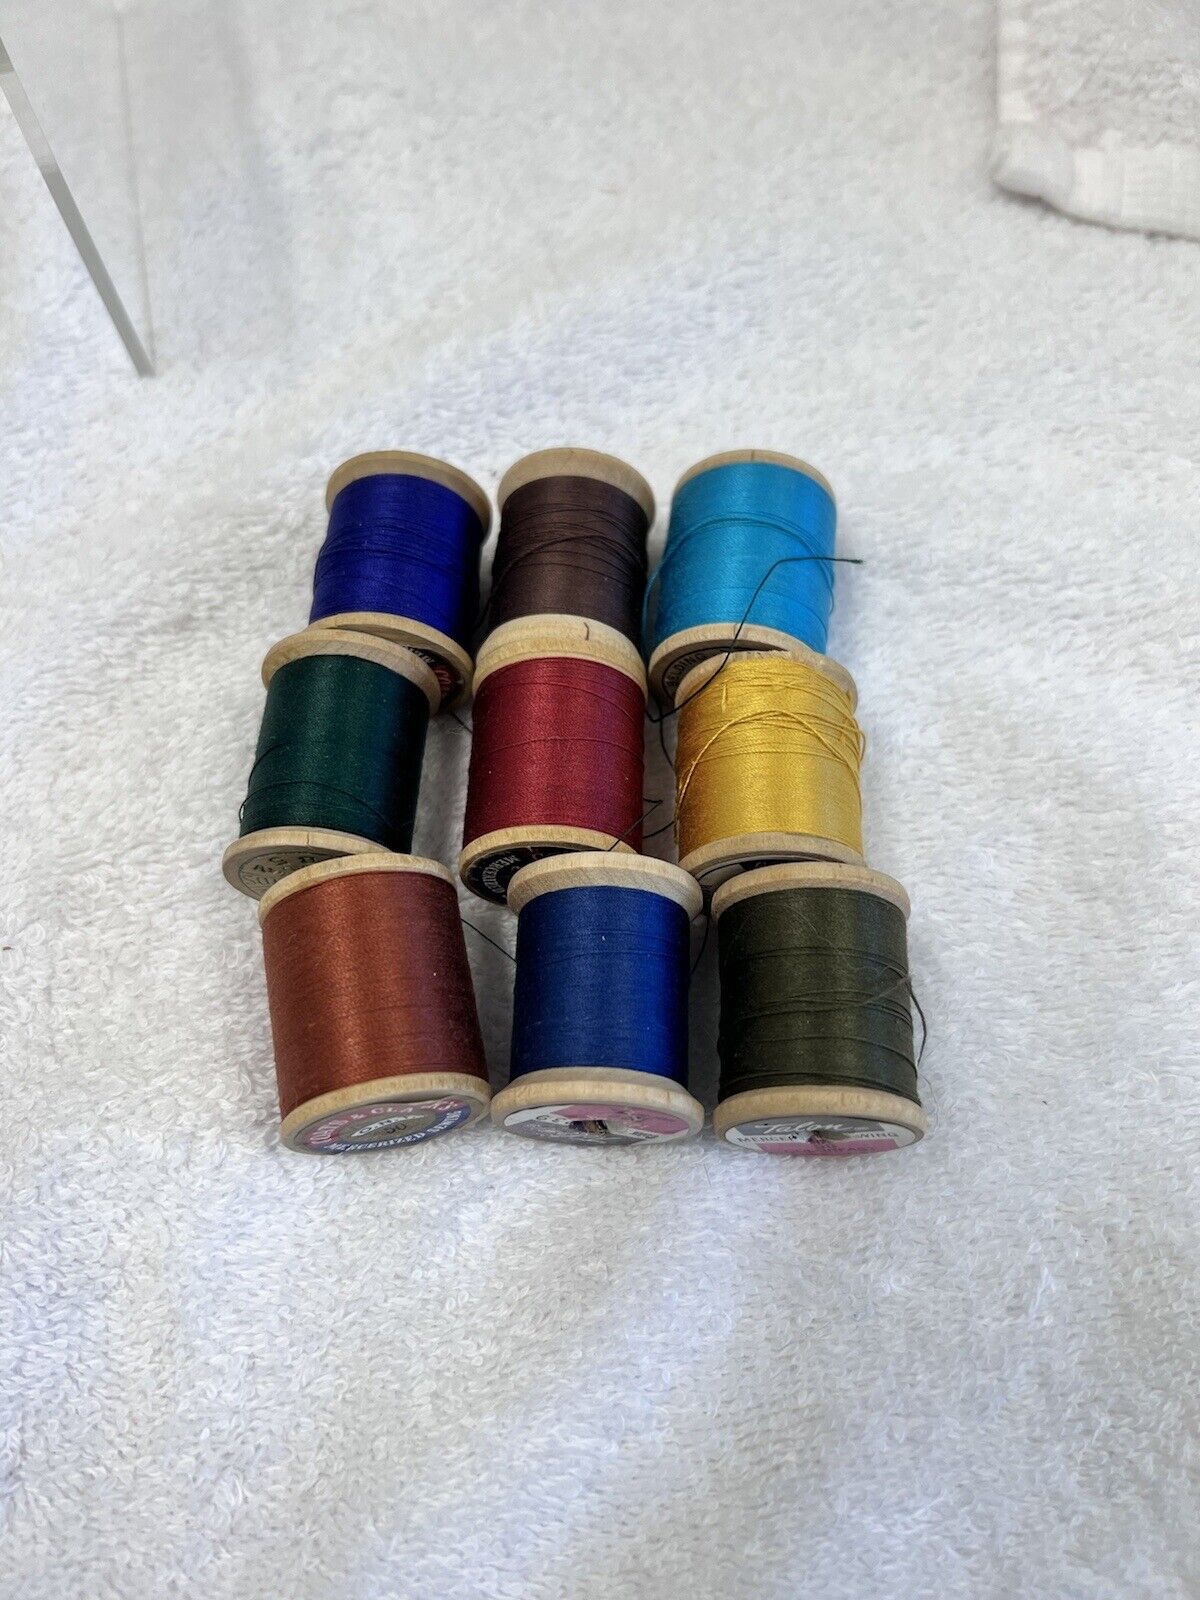 Lot Of 9 Vintage Wooden Spools Of Thread In Natural And Jewel Tone Colors